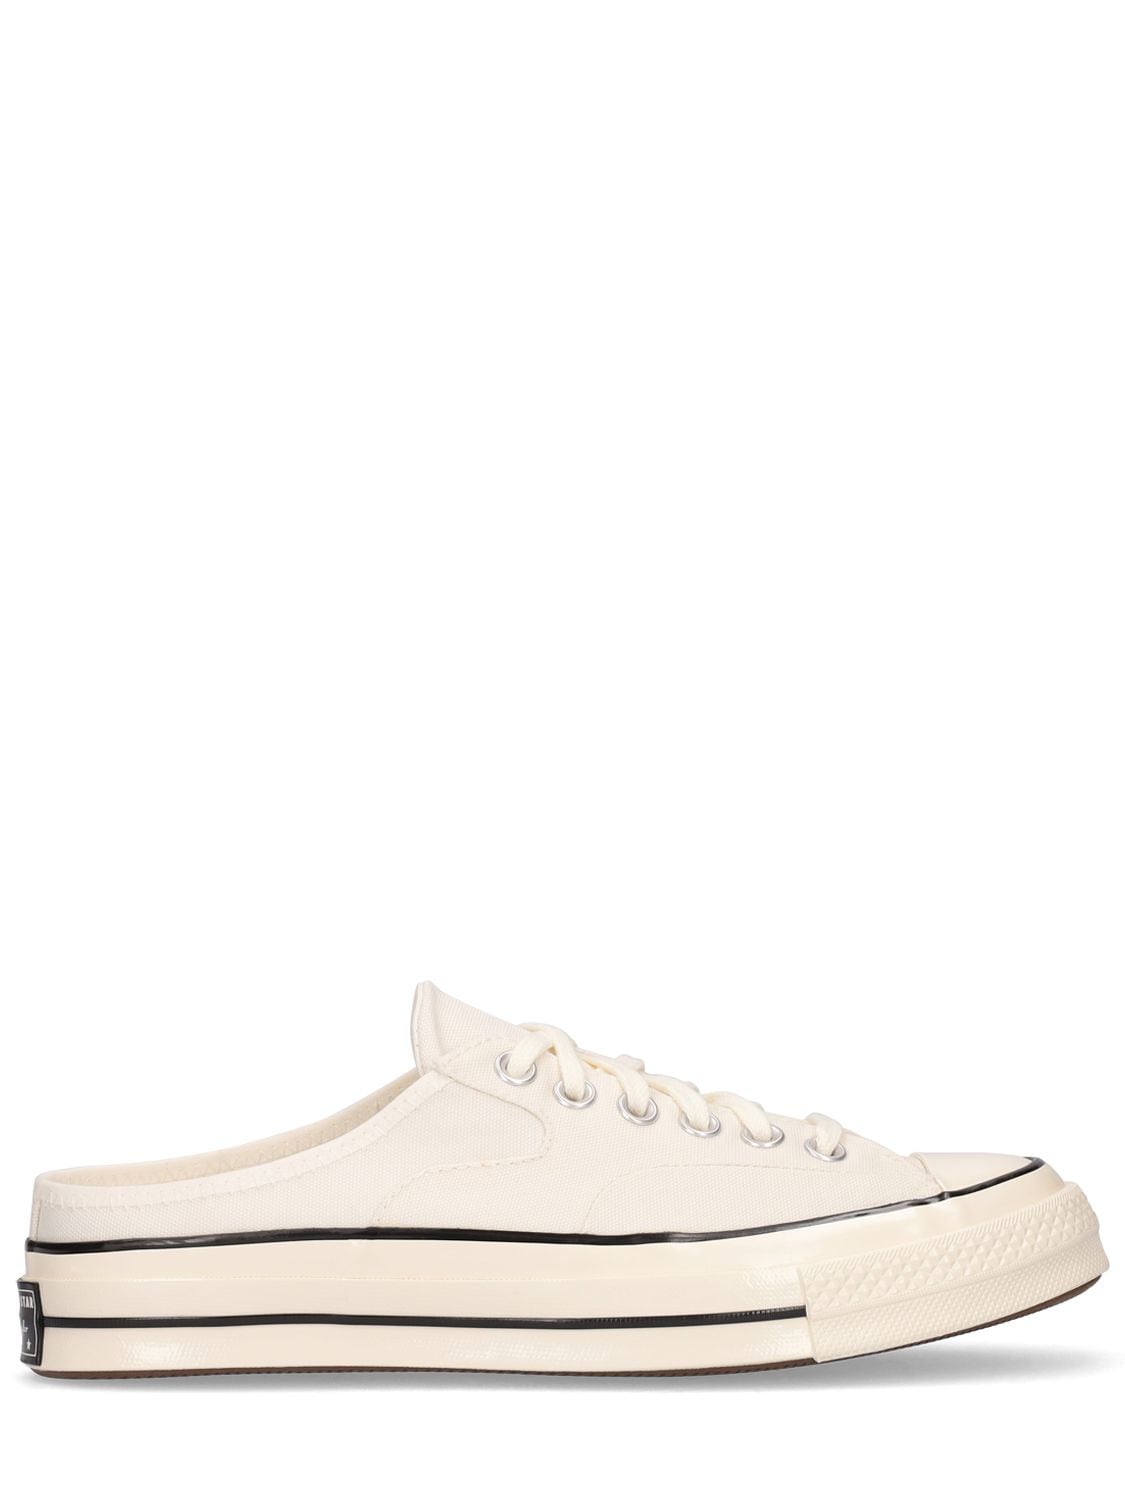 CONVERSE CHUCK 70 MULE RECYCLED CANVAS SNEAKERS